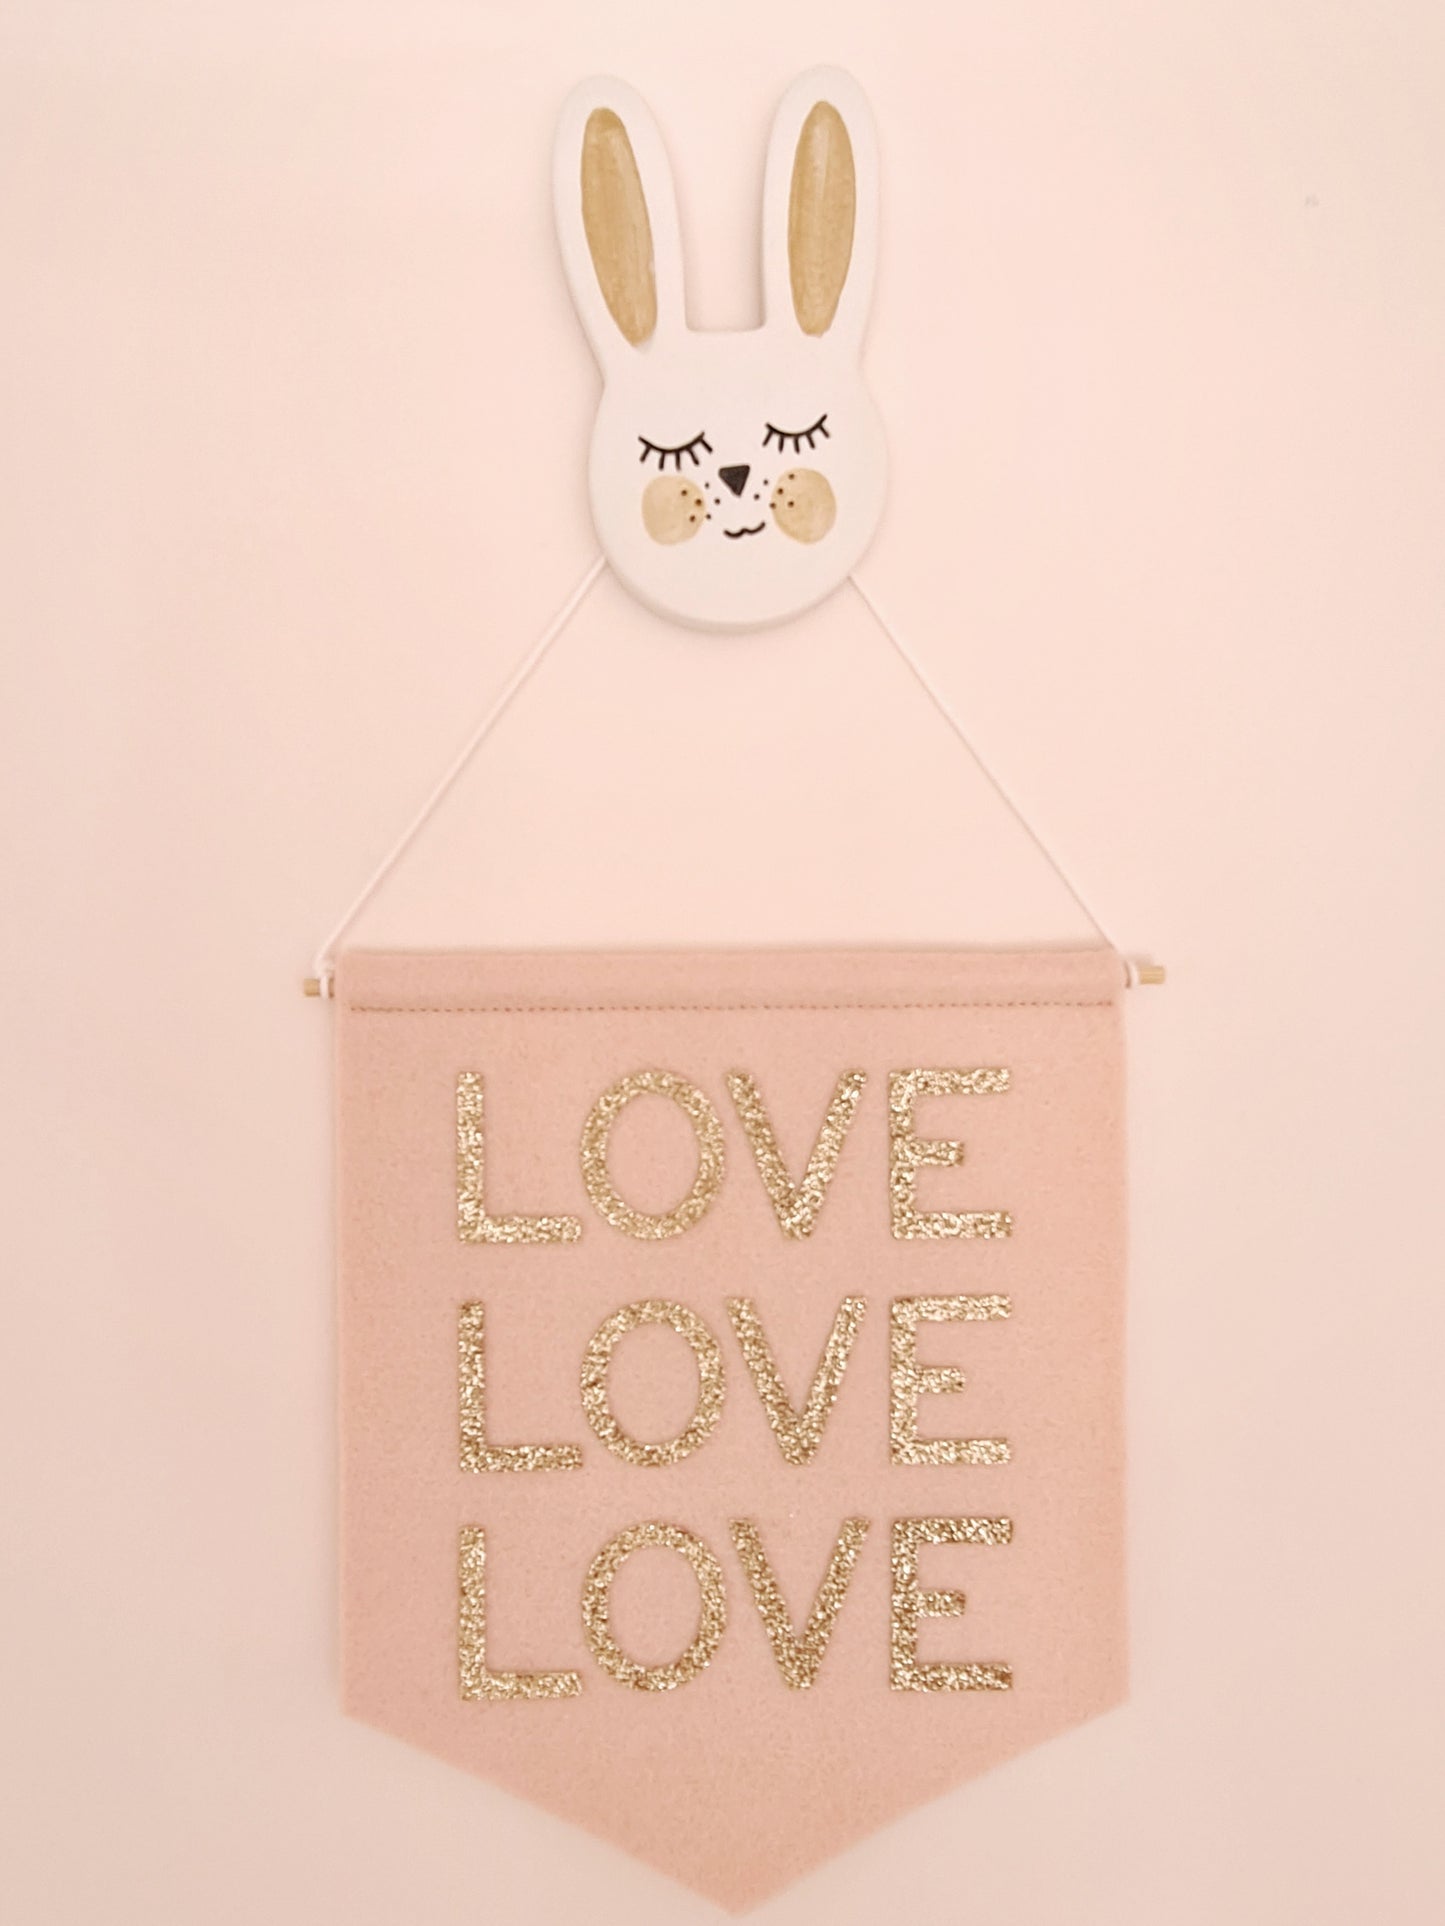 Bunny picture hook cover